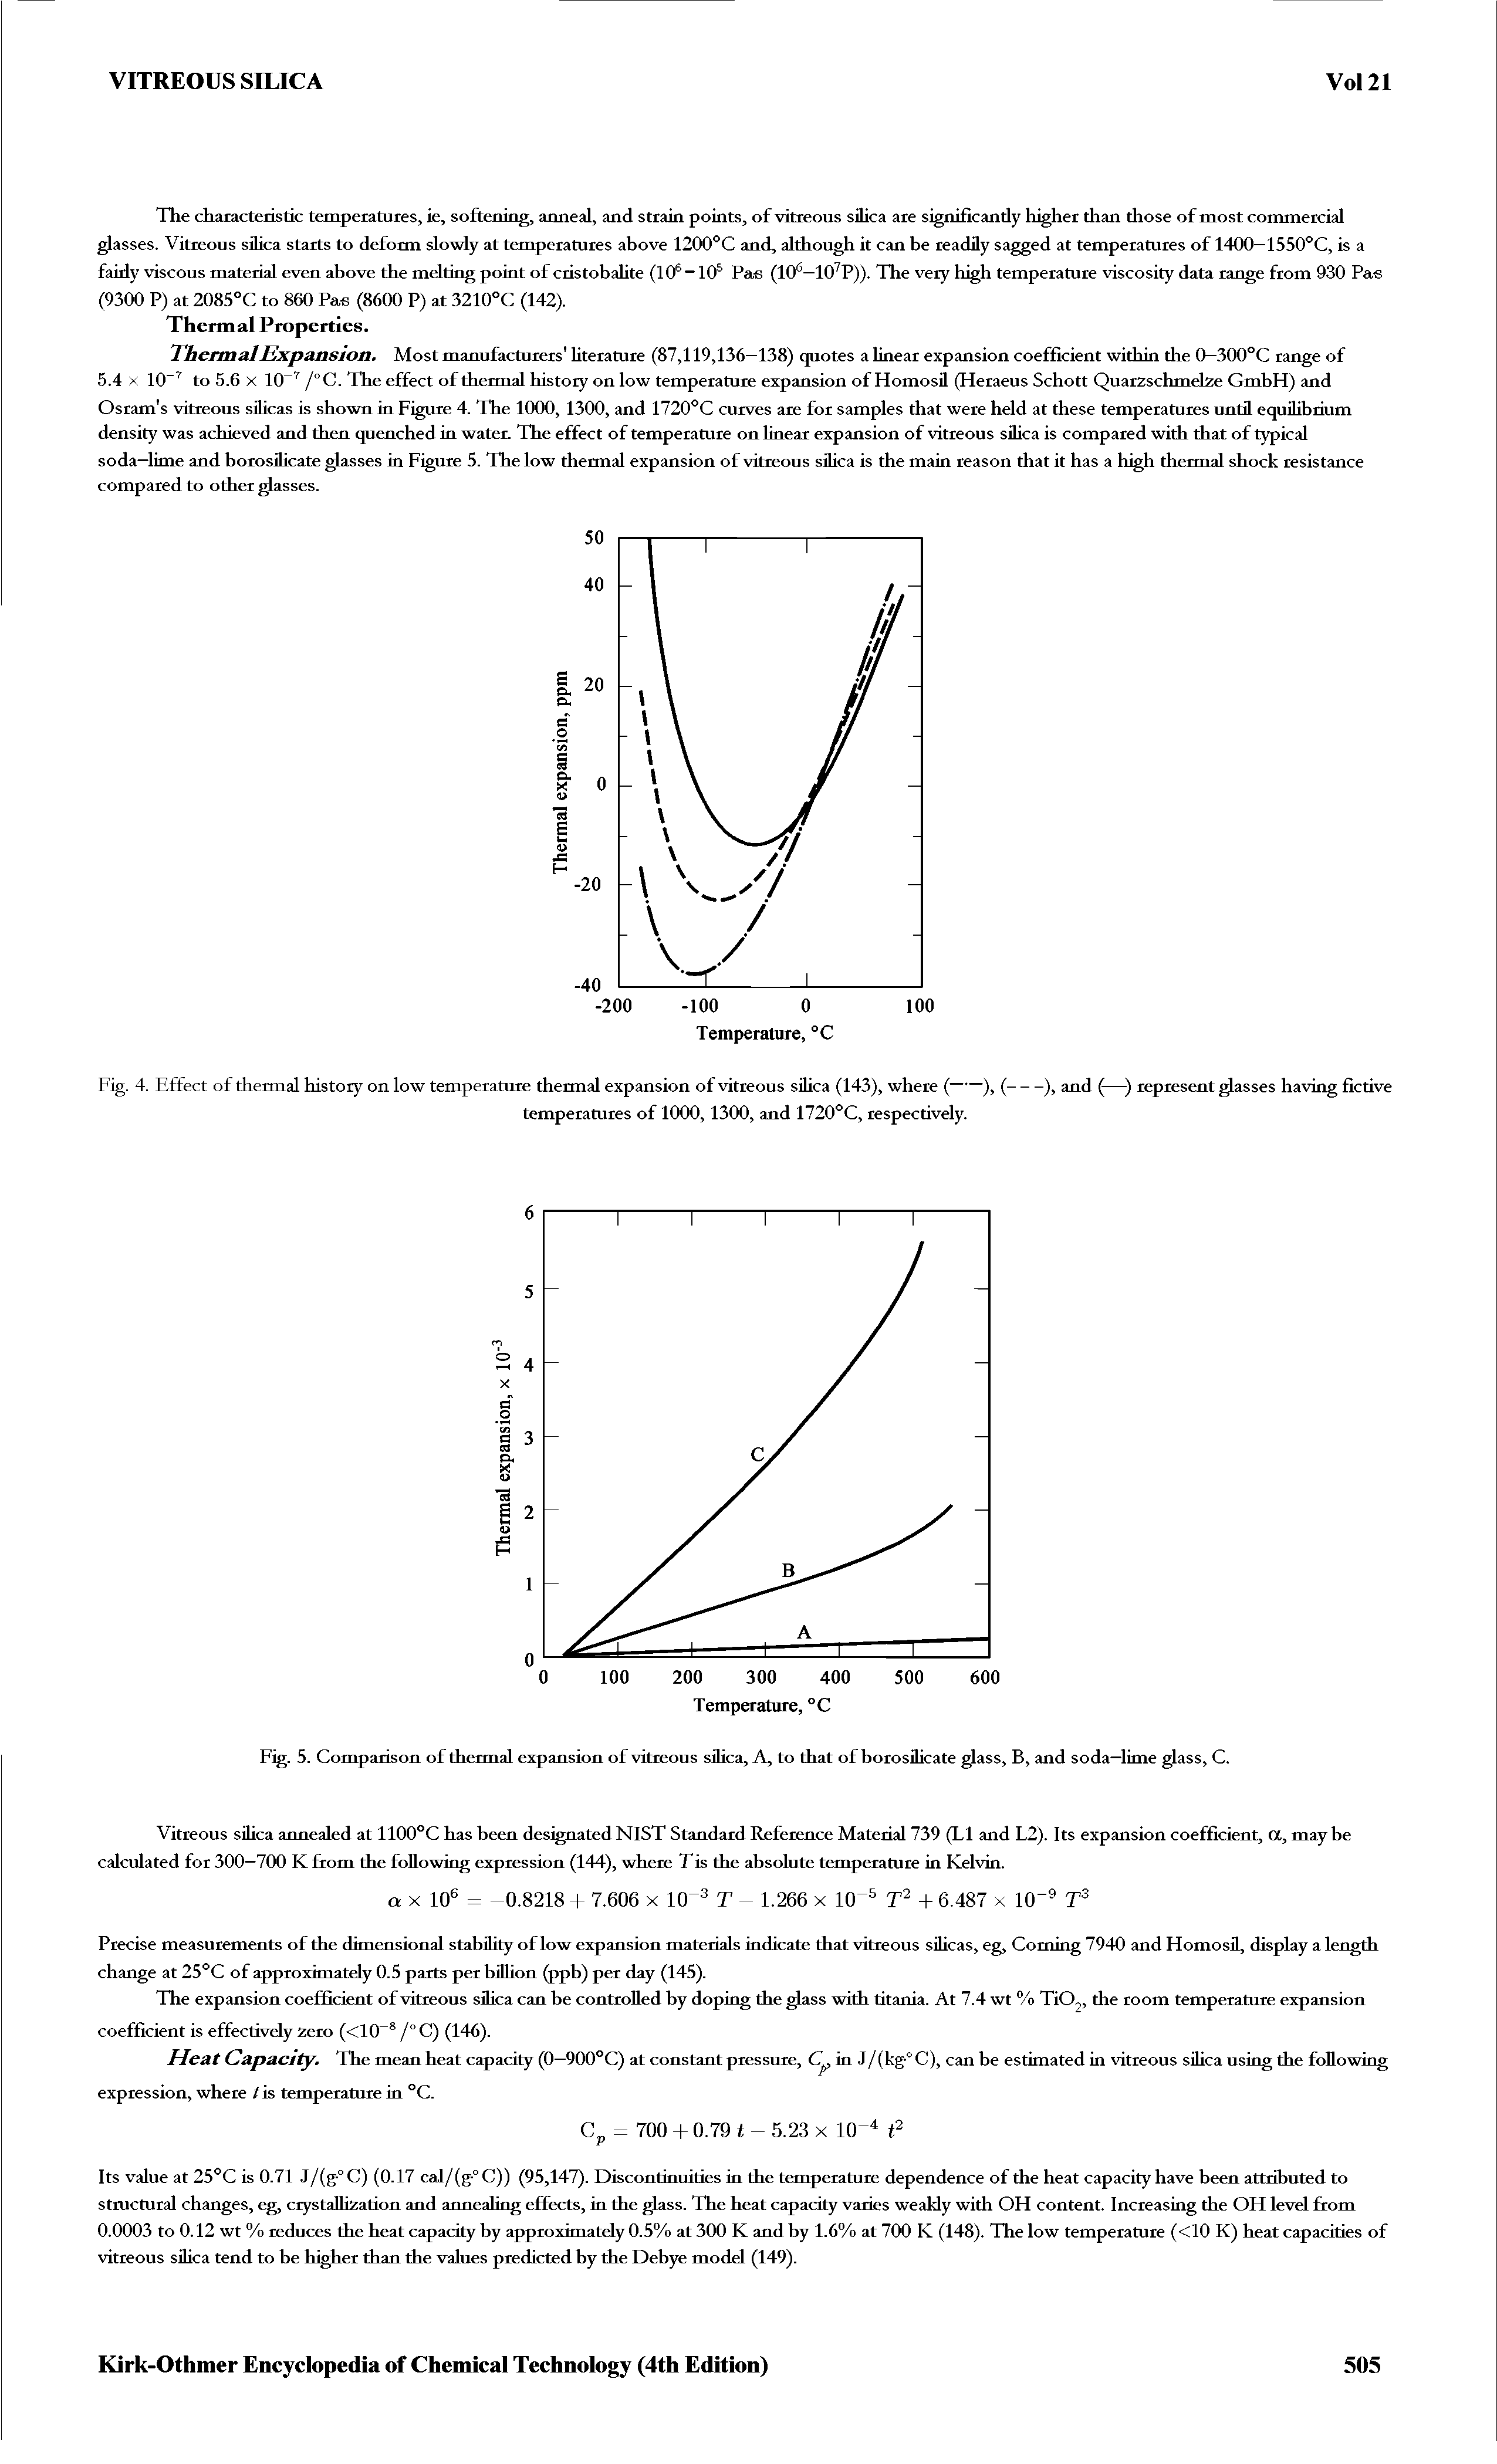 Fig. 5. Comparison of thermal expansion of vitreous silica, A, to that of borosilicate glass, B, and soda—lime glass, C.